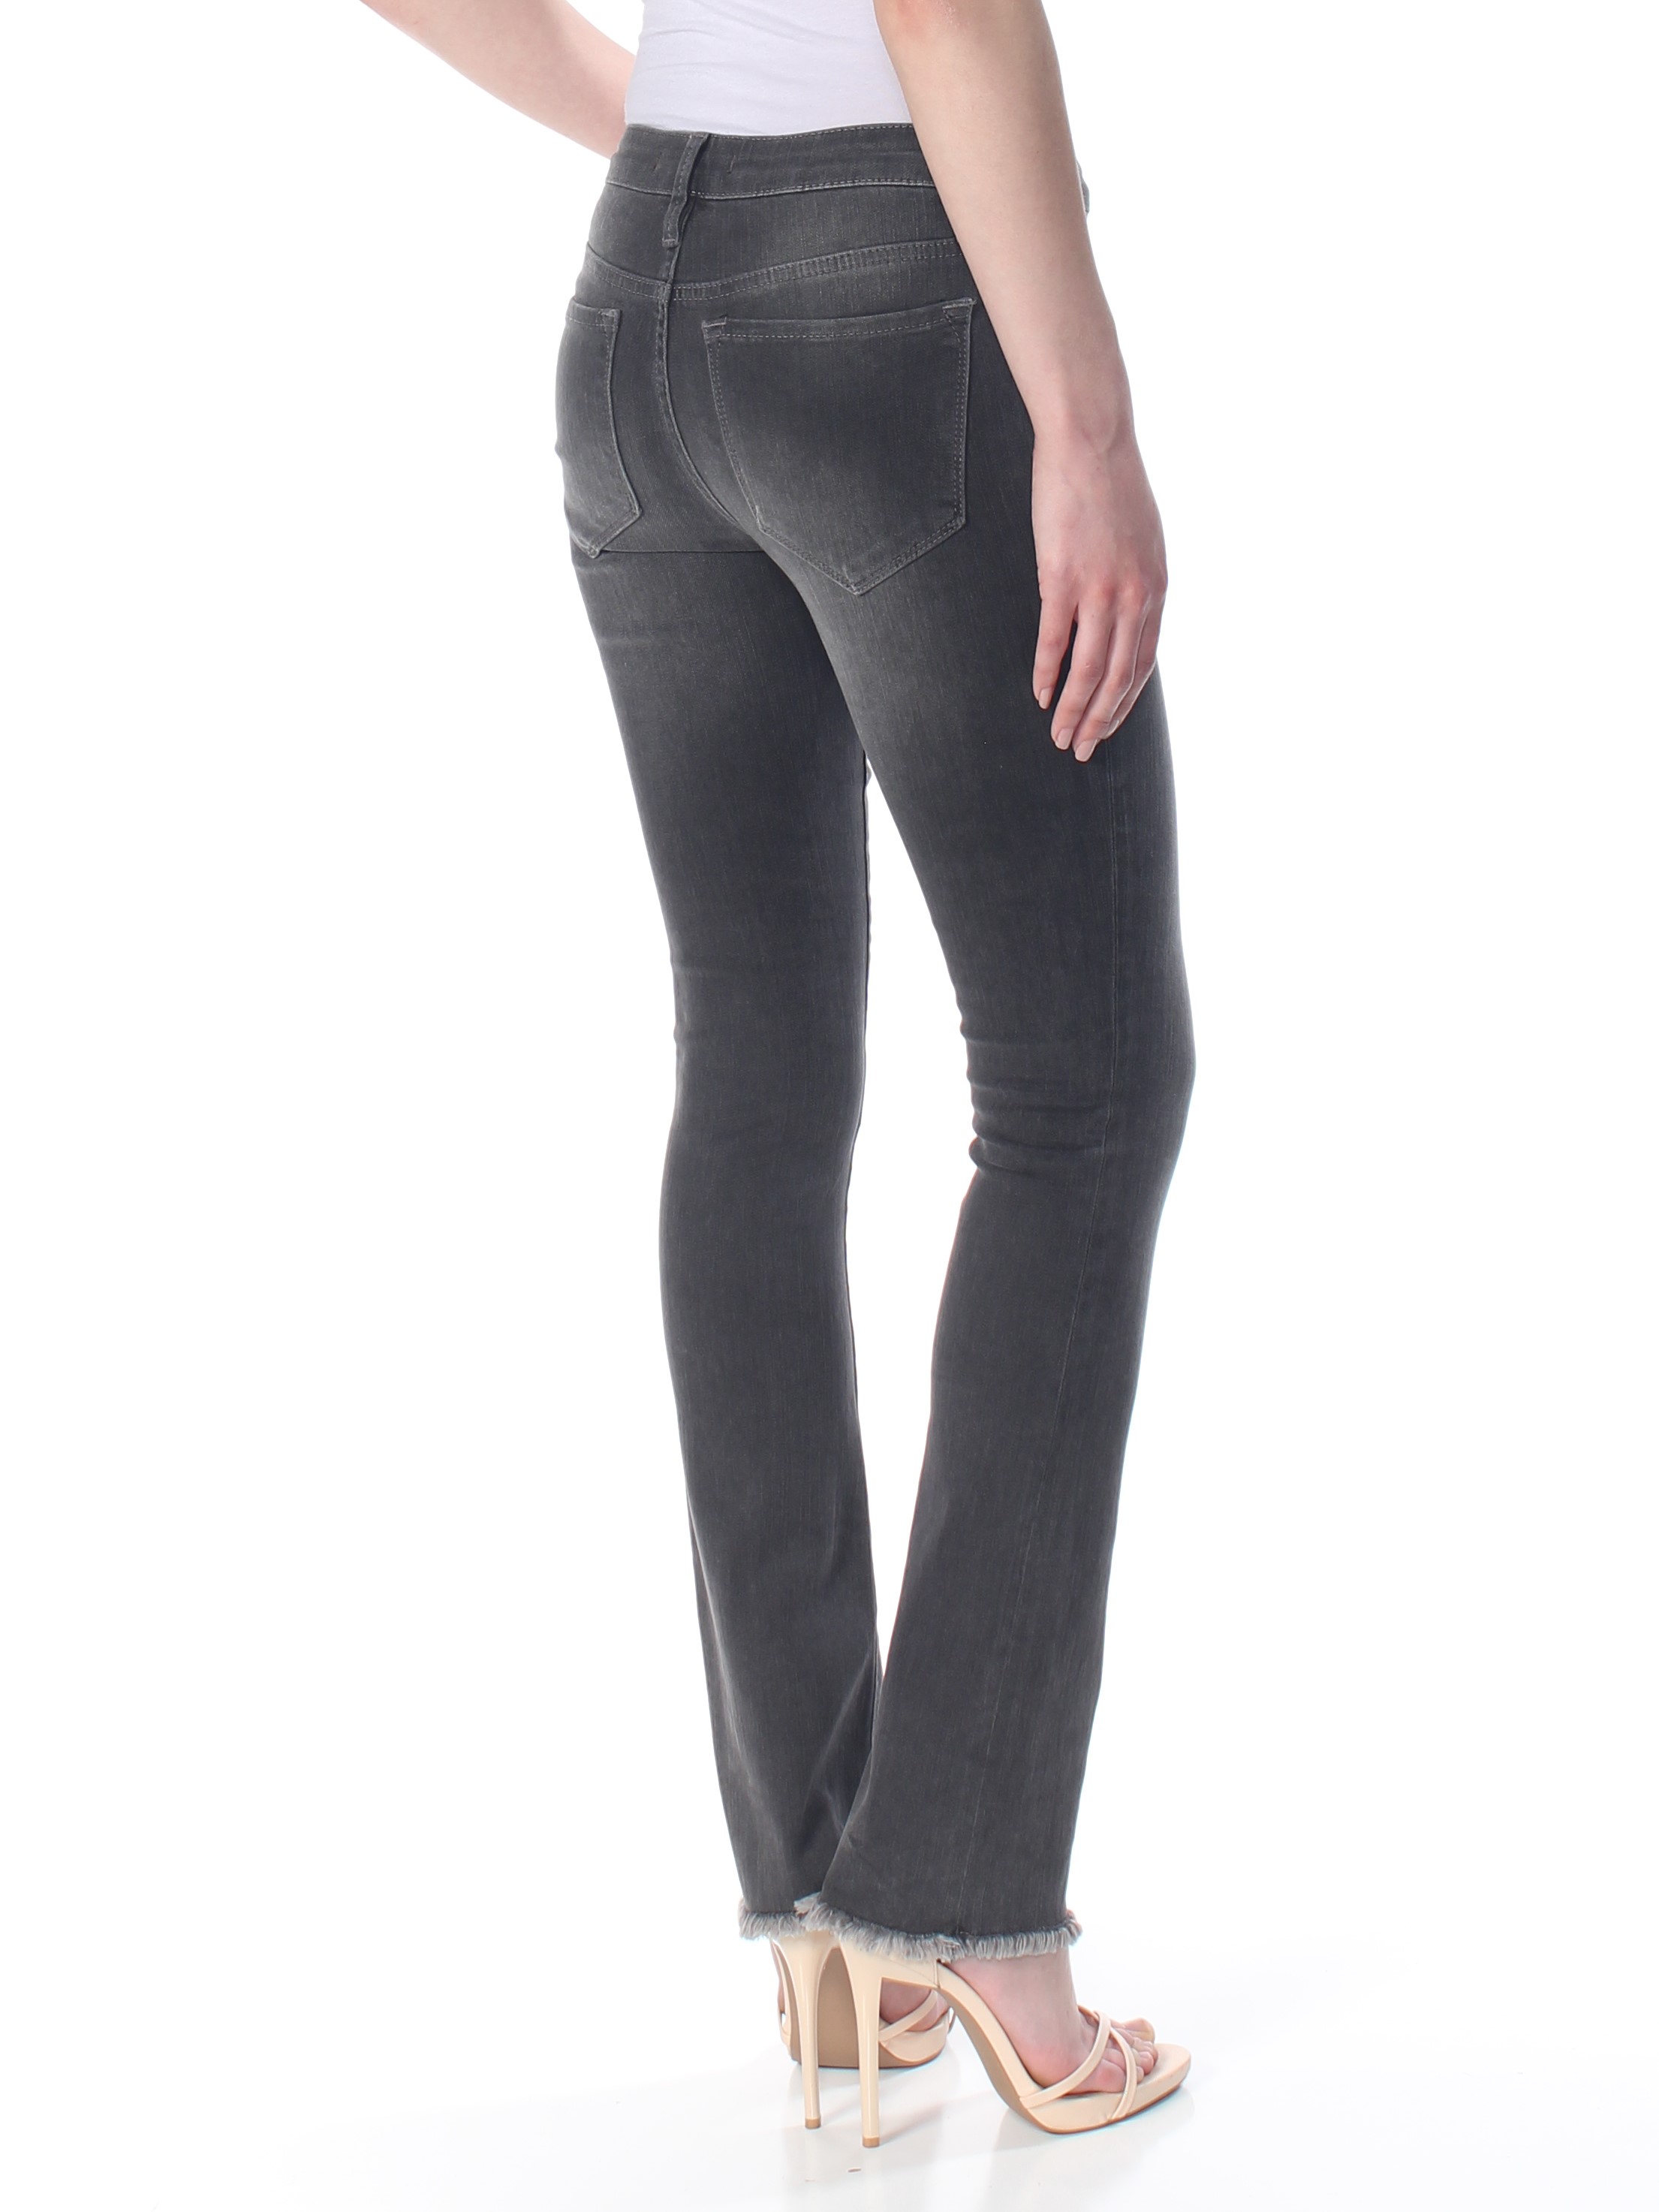 FREE PEOPLE $78 Womens New 1140 Black Zippered Pocketed Jeans 27 Waist B+B - image 4 of 4